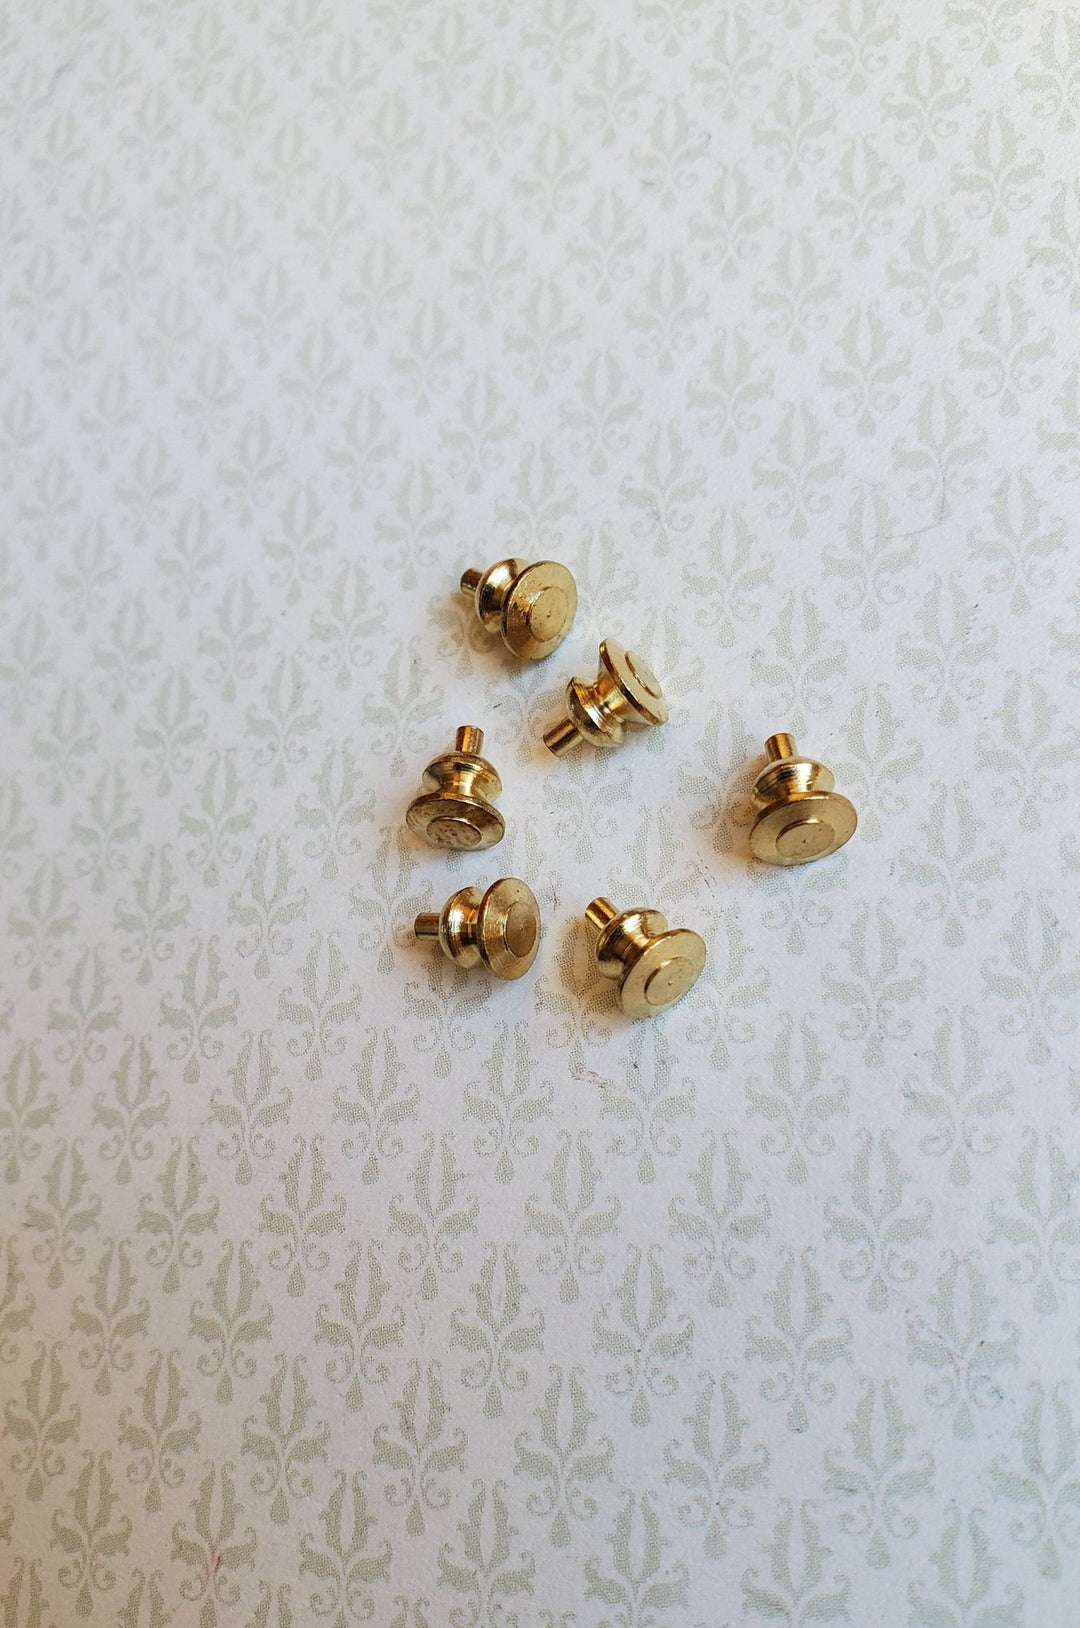 Dollhouse Miniature Tiny Gold Brass Knobs for Door or Drawer Pulls Set of 6 1:12 Scale or Fairy Garden - Miniature Crush